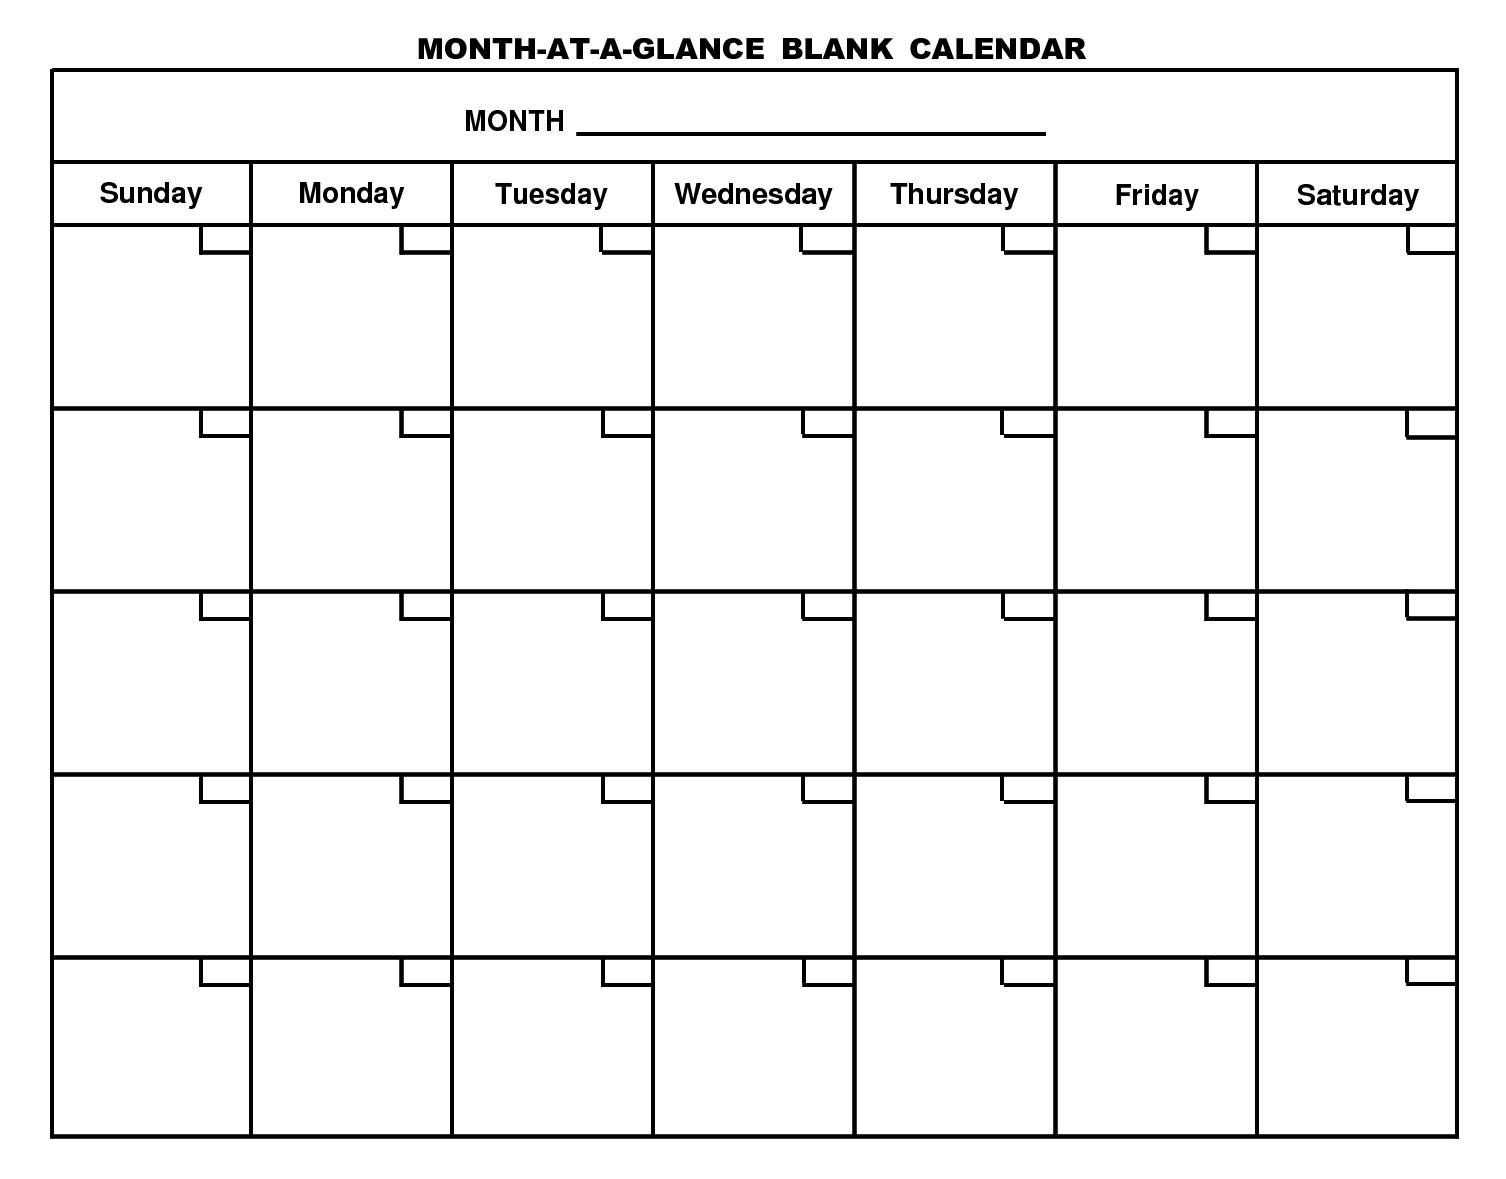 Month At A Glance Blank Calendar | Monthly Printable Calender For Month At A Glance Blank Calendar Template